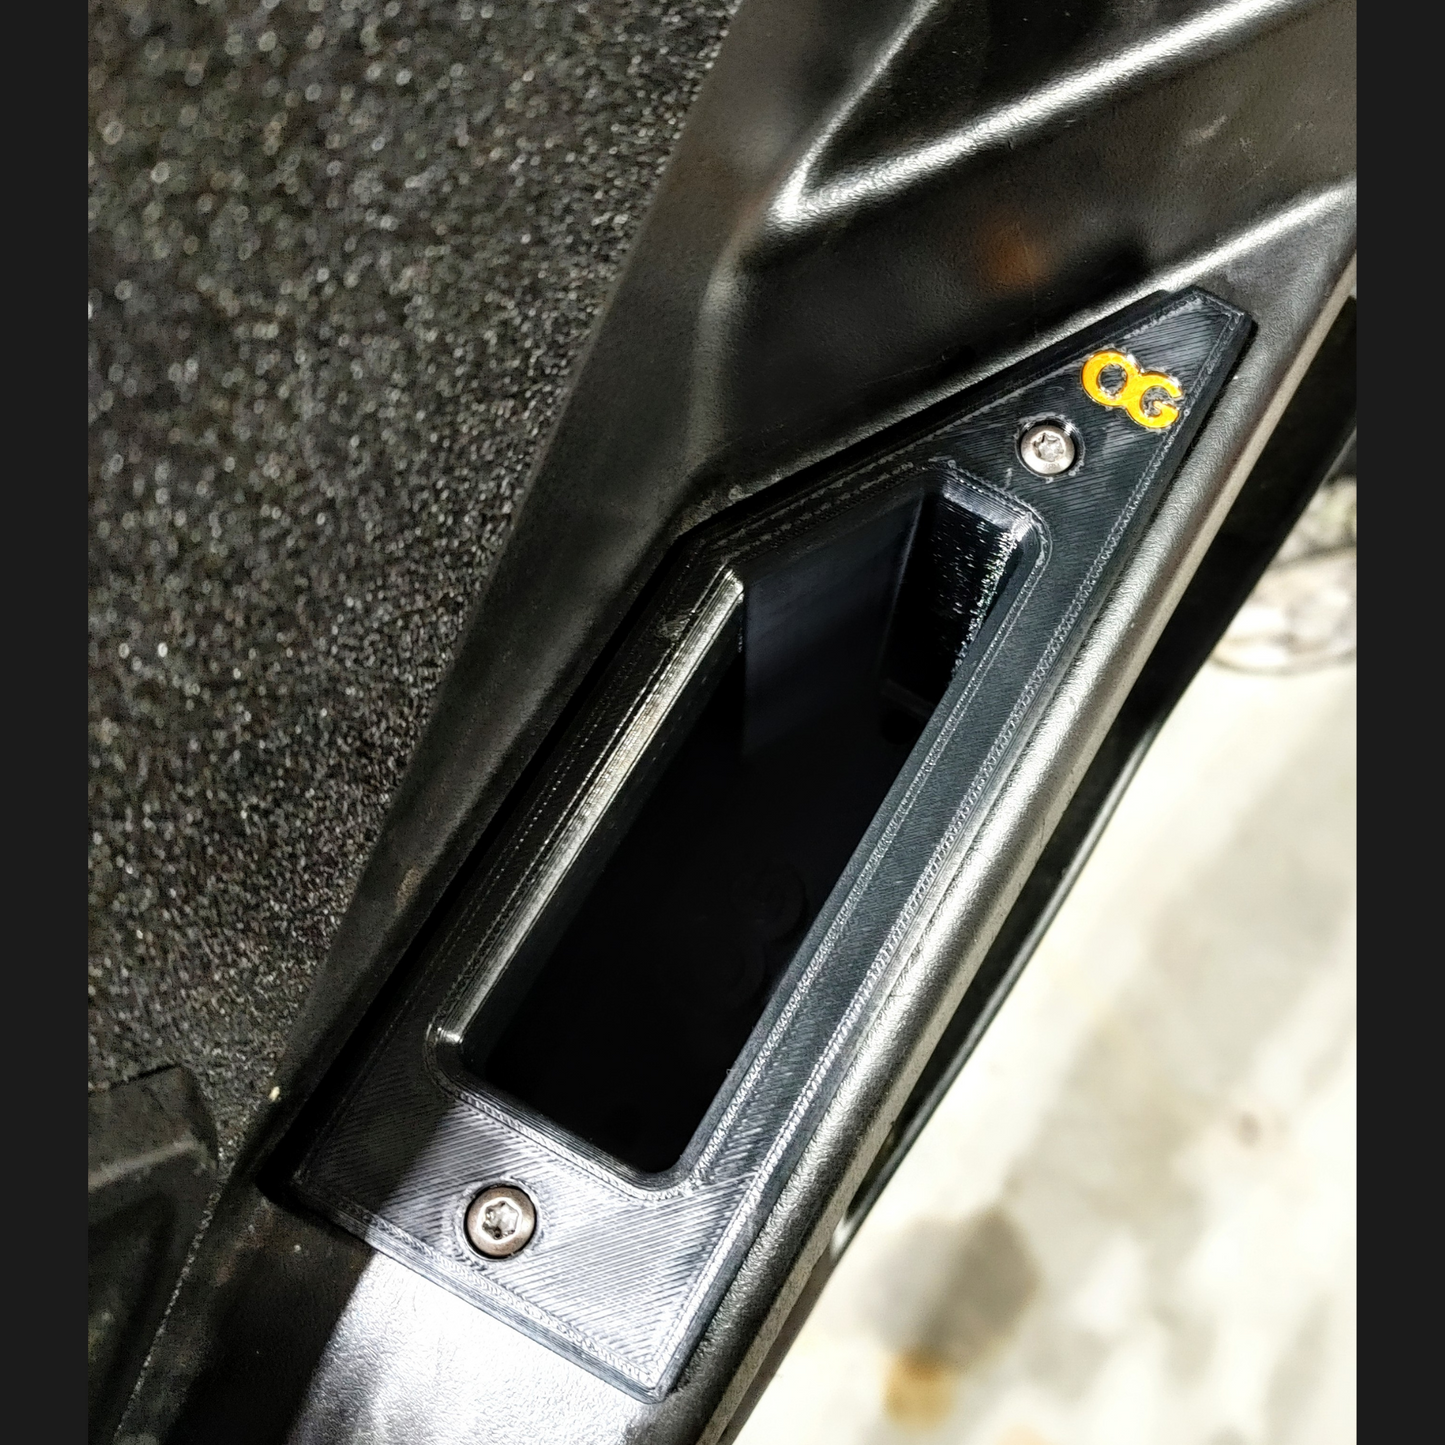 A second angle of the passenger side OG recessed door pull handle installed on the polaris general door.